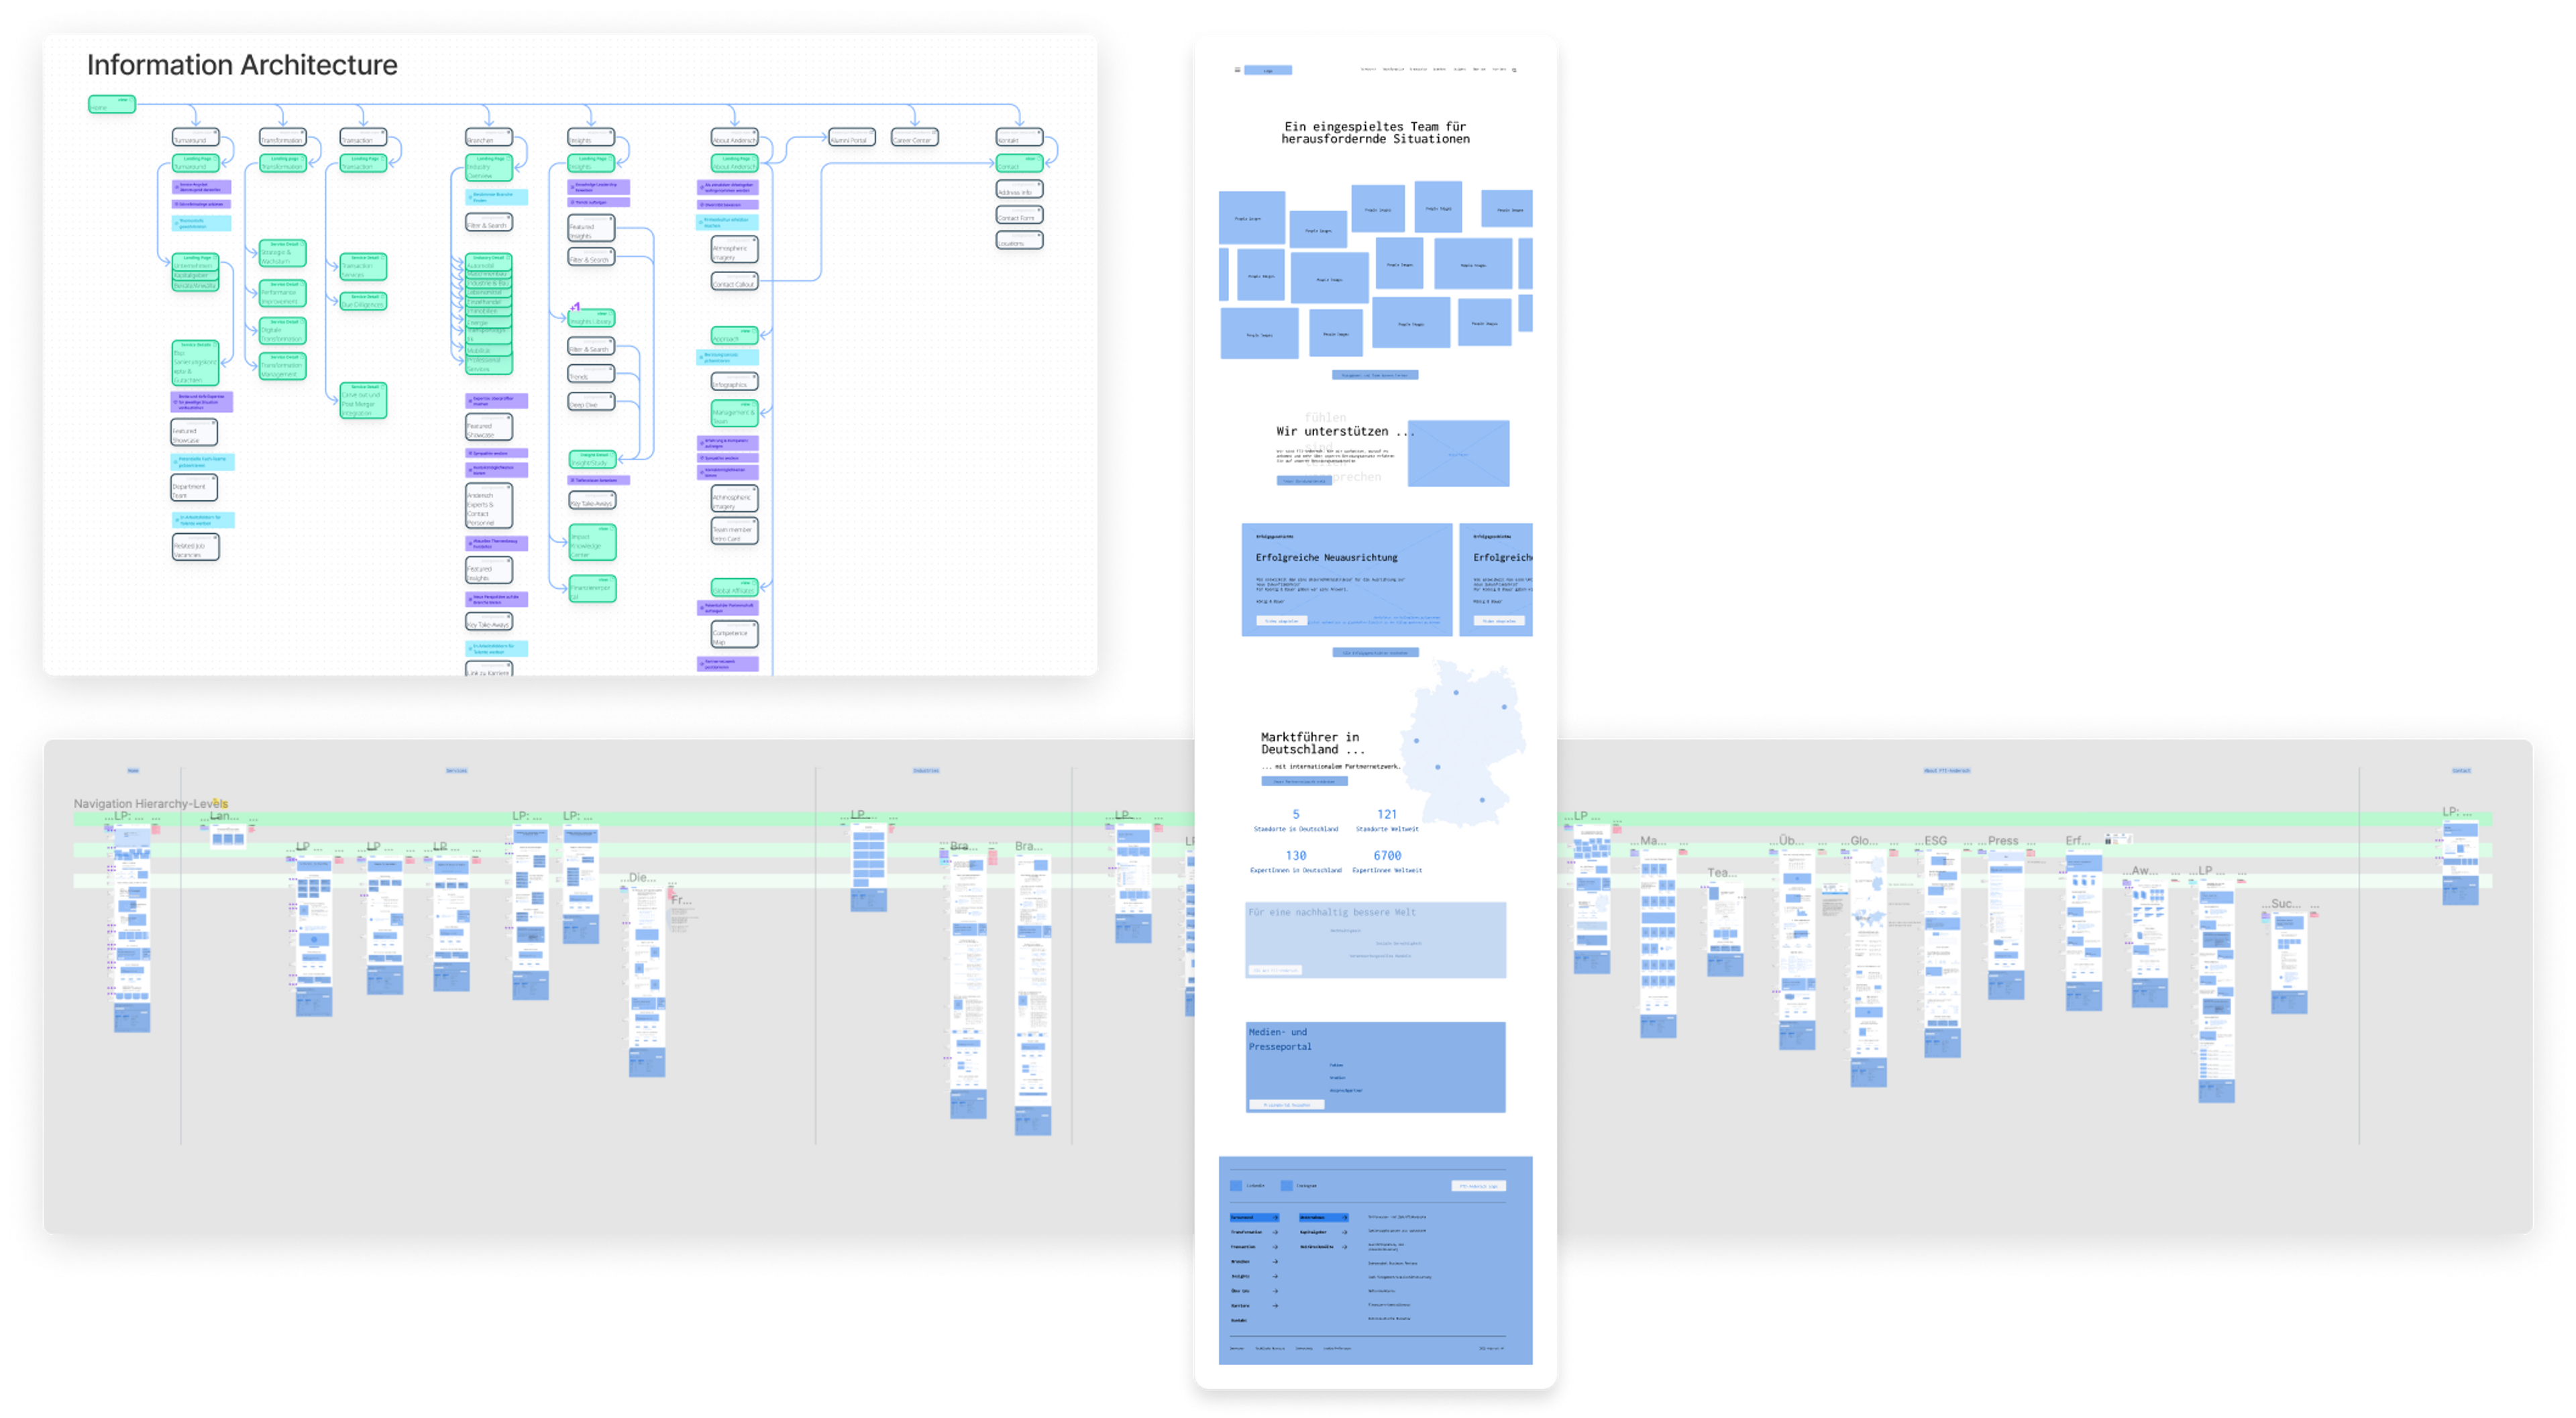 Mockup showing wireframes and information architecture